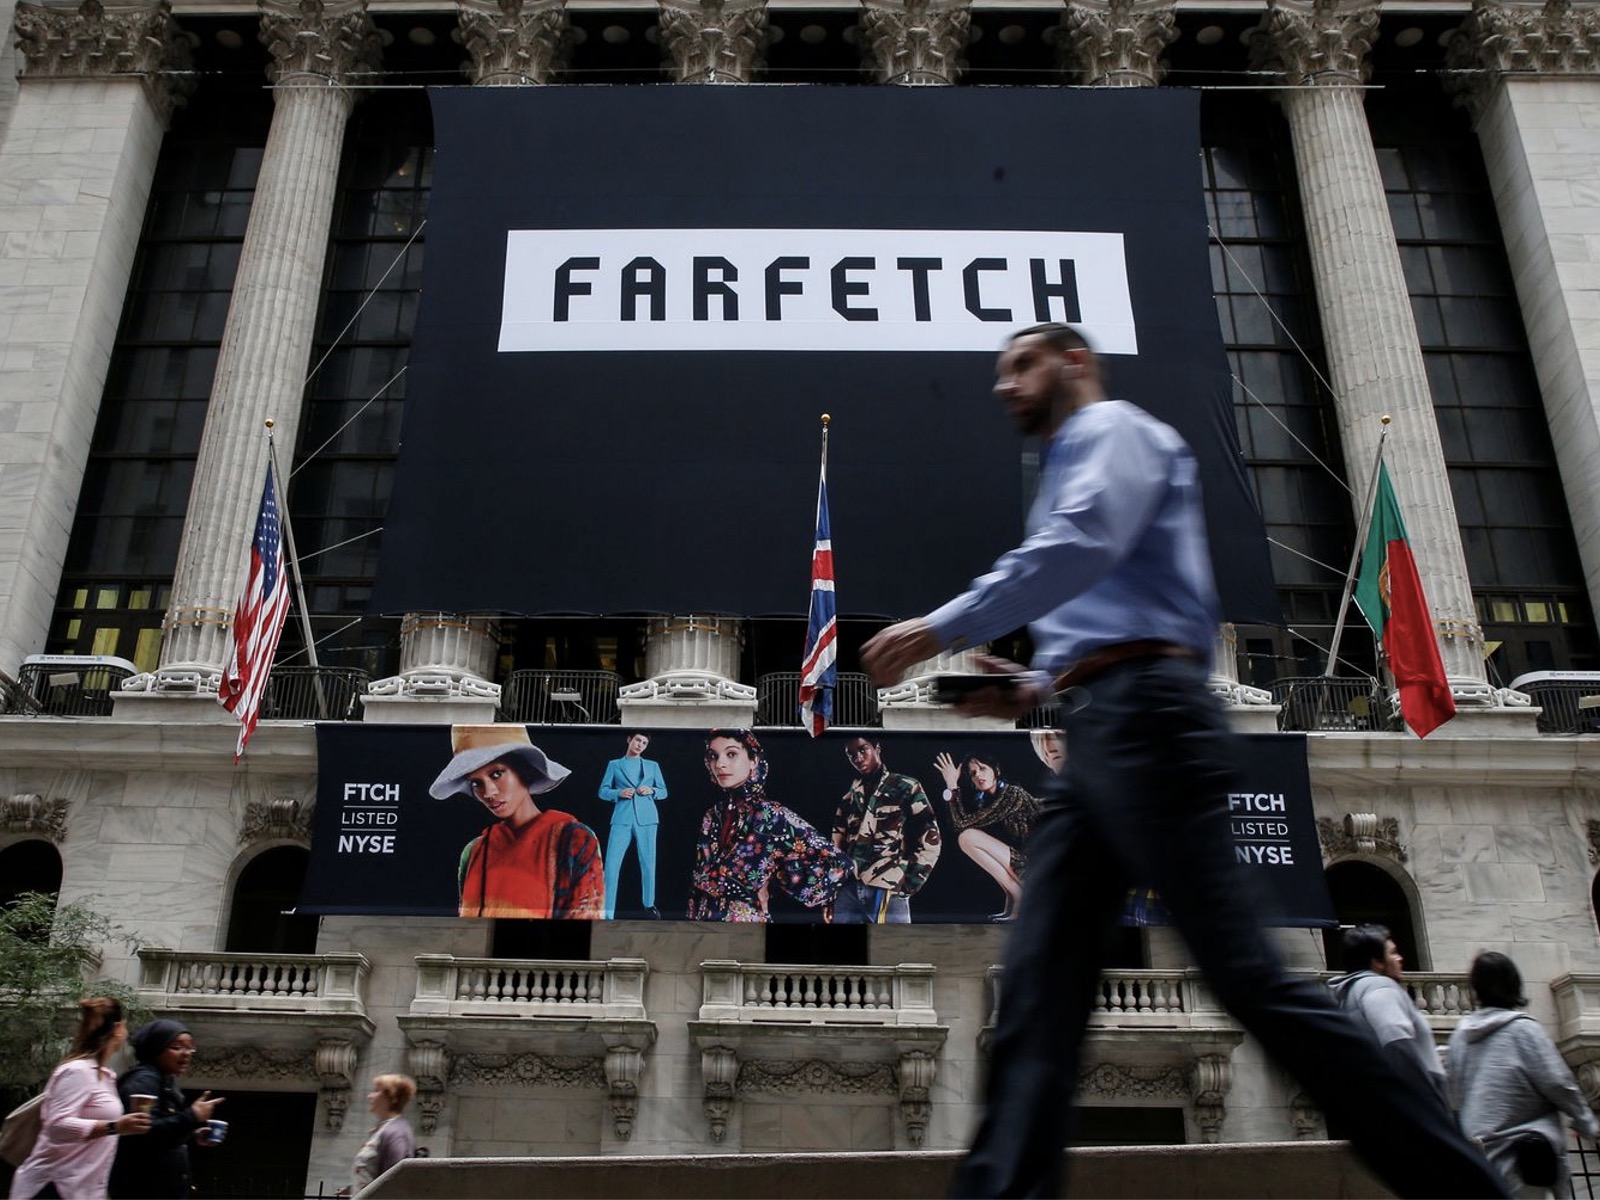 Farfetch Accepts Cryptocurrency Payments